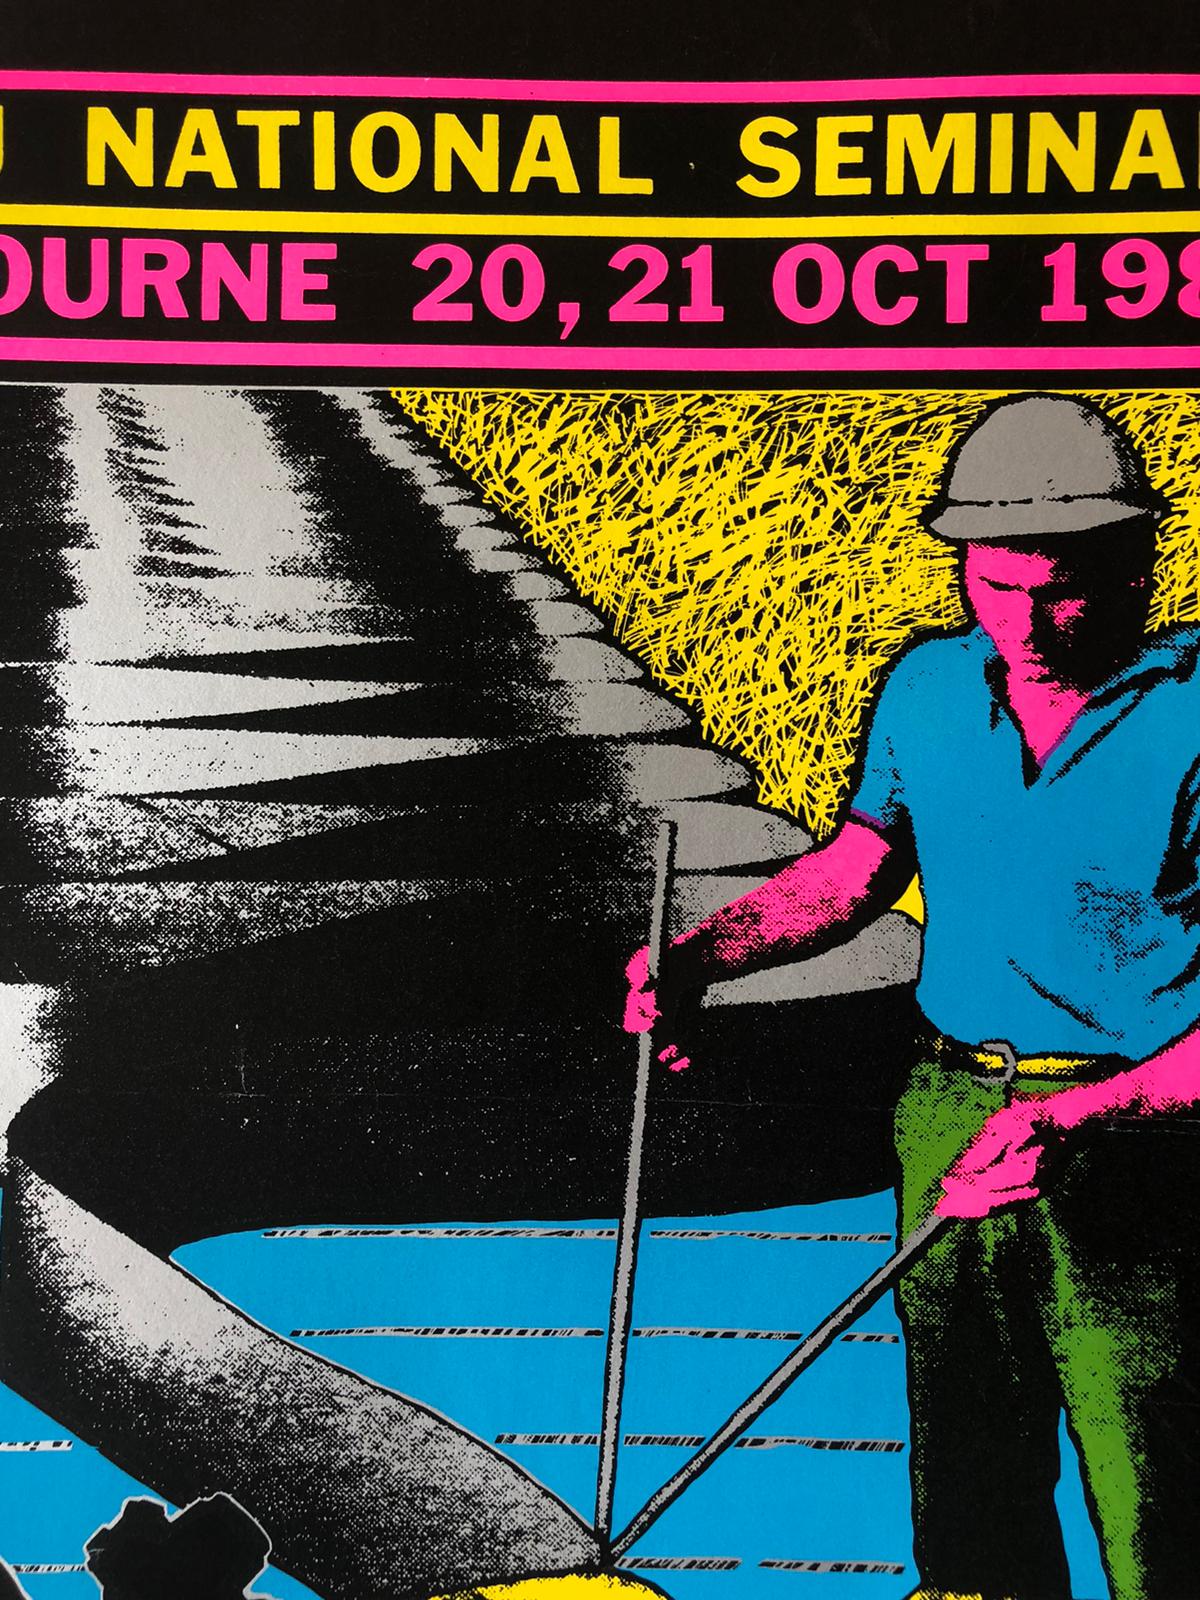 'Art and Working Life' ACTU National Seminar and Festival 1981 Promotional Poster